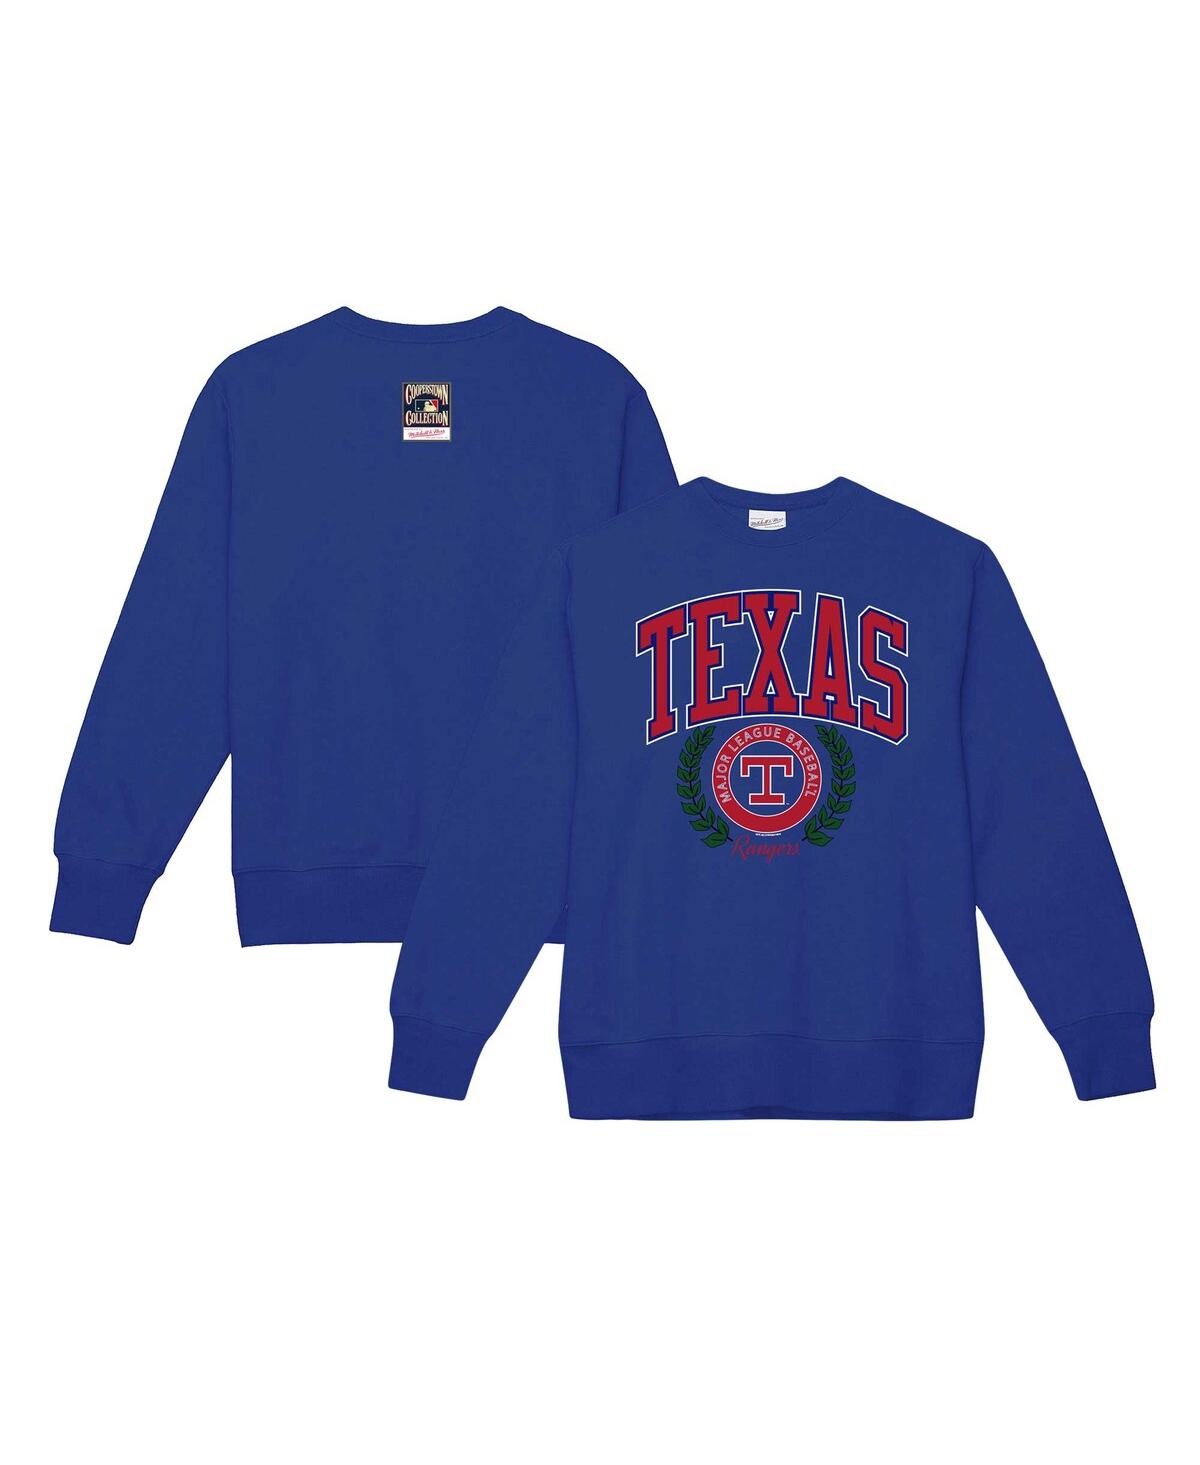 Shop Mitchell & Ness Women's  Royal Texas Rangers Cooperstown Collection Logo Pullover Sweatshirt